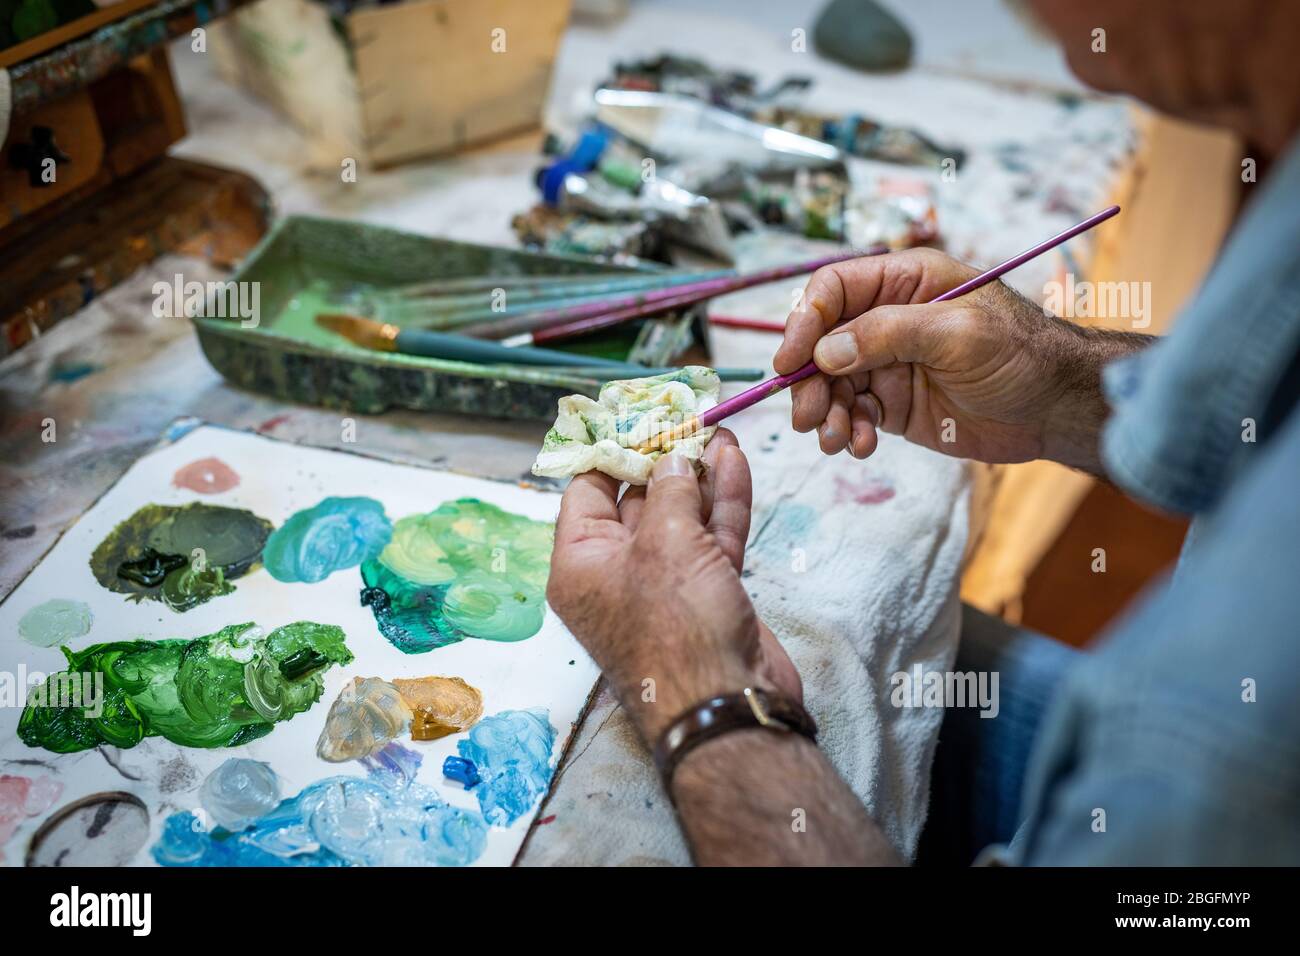 A painters senior hands cleaning a paint brush in a studio. Stock Photo